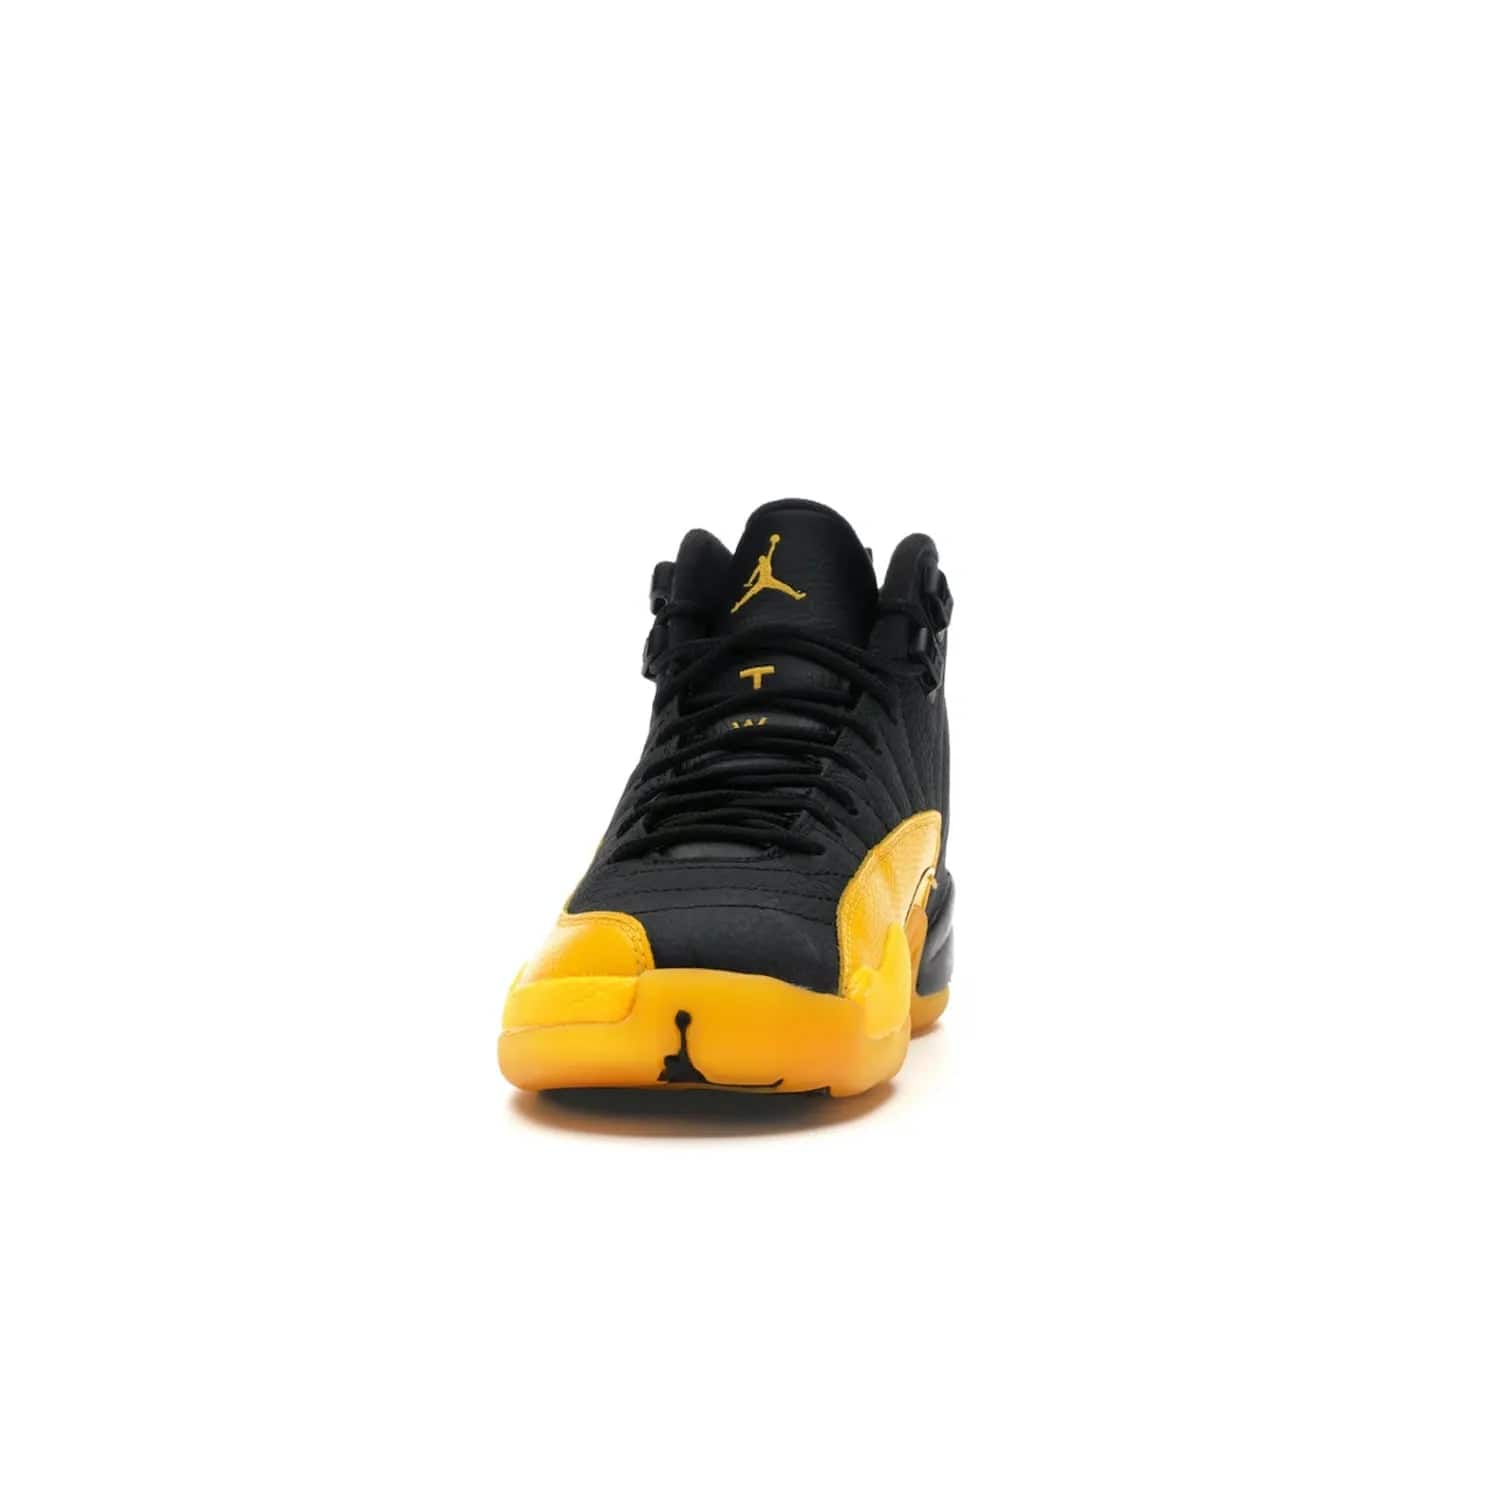 Jordan 12 Retro Black University Gold (GS) - Image 11 - Only at www.BallersClubKickz.com - Upgrade your kid's shoe collection with the Jordan 12 Retro Black University Gold. With classic style, black tumbled leather upper, and University Gold accents, it's a great summer look. Out July 2020.